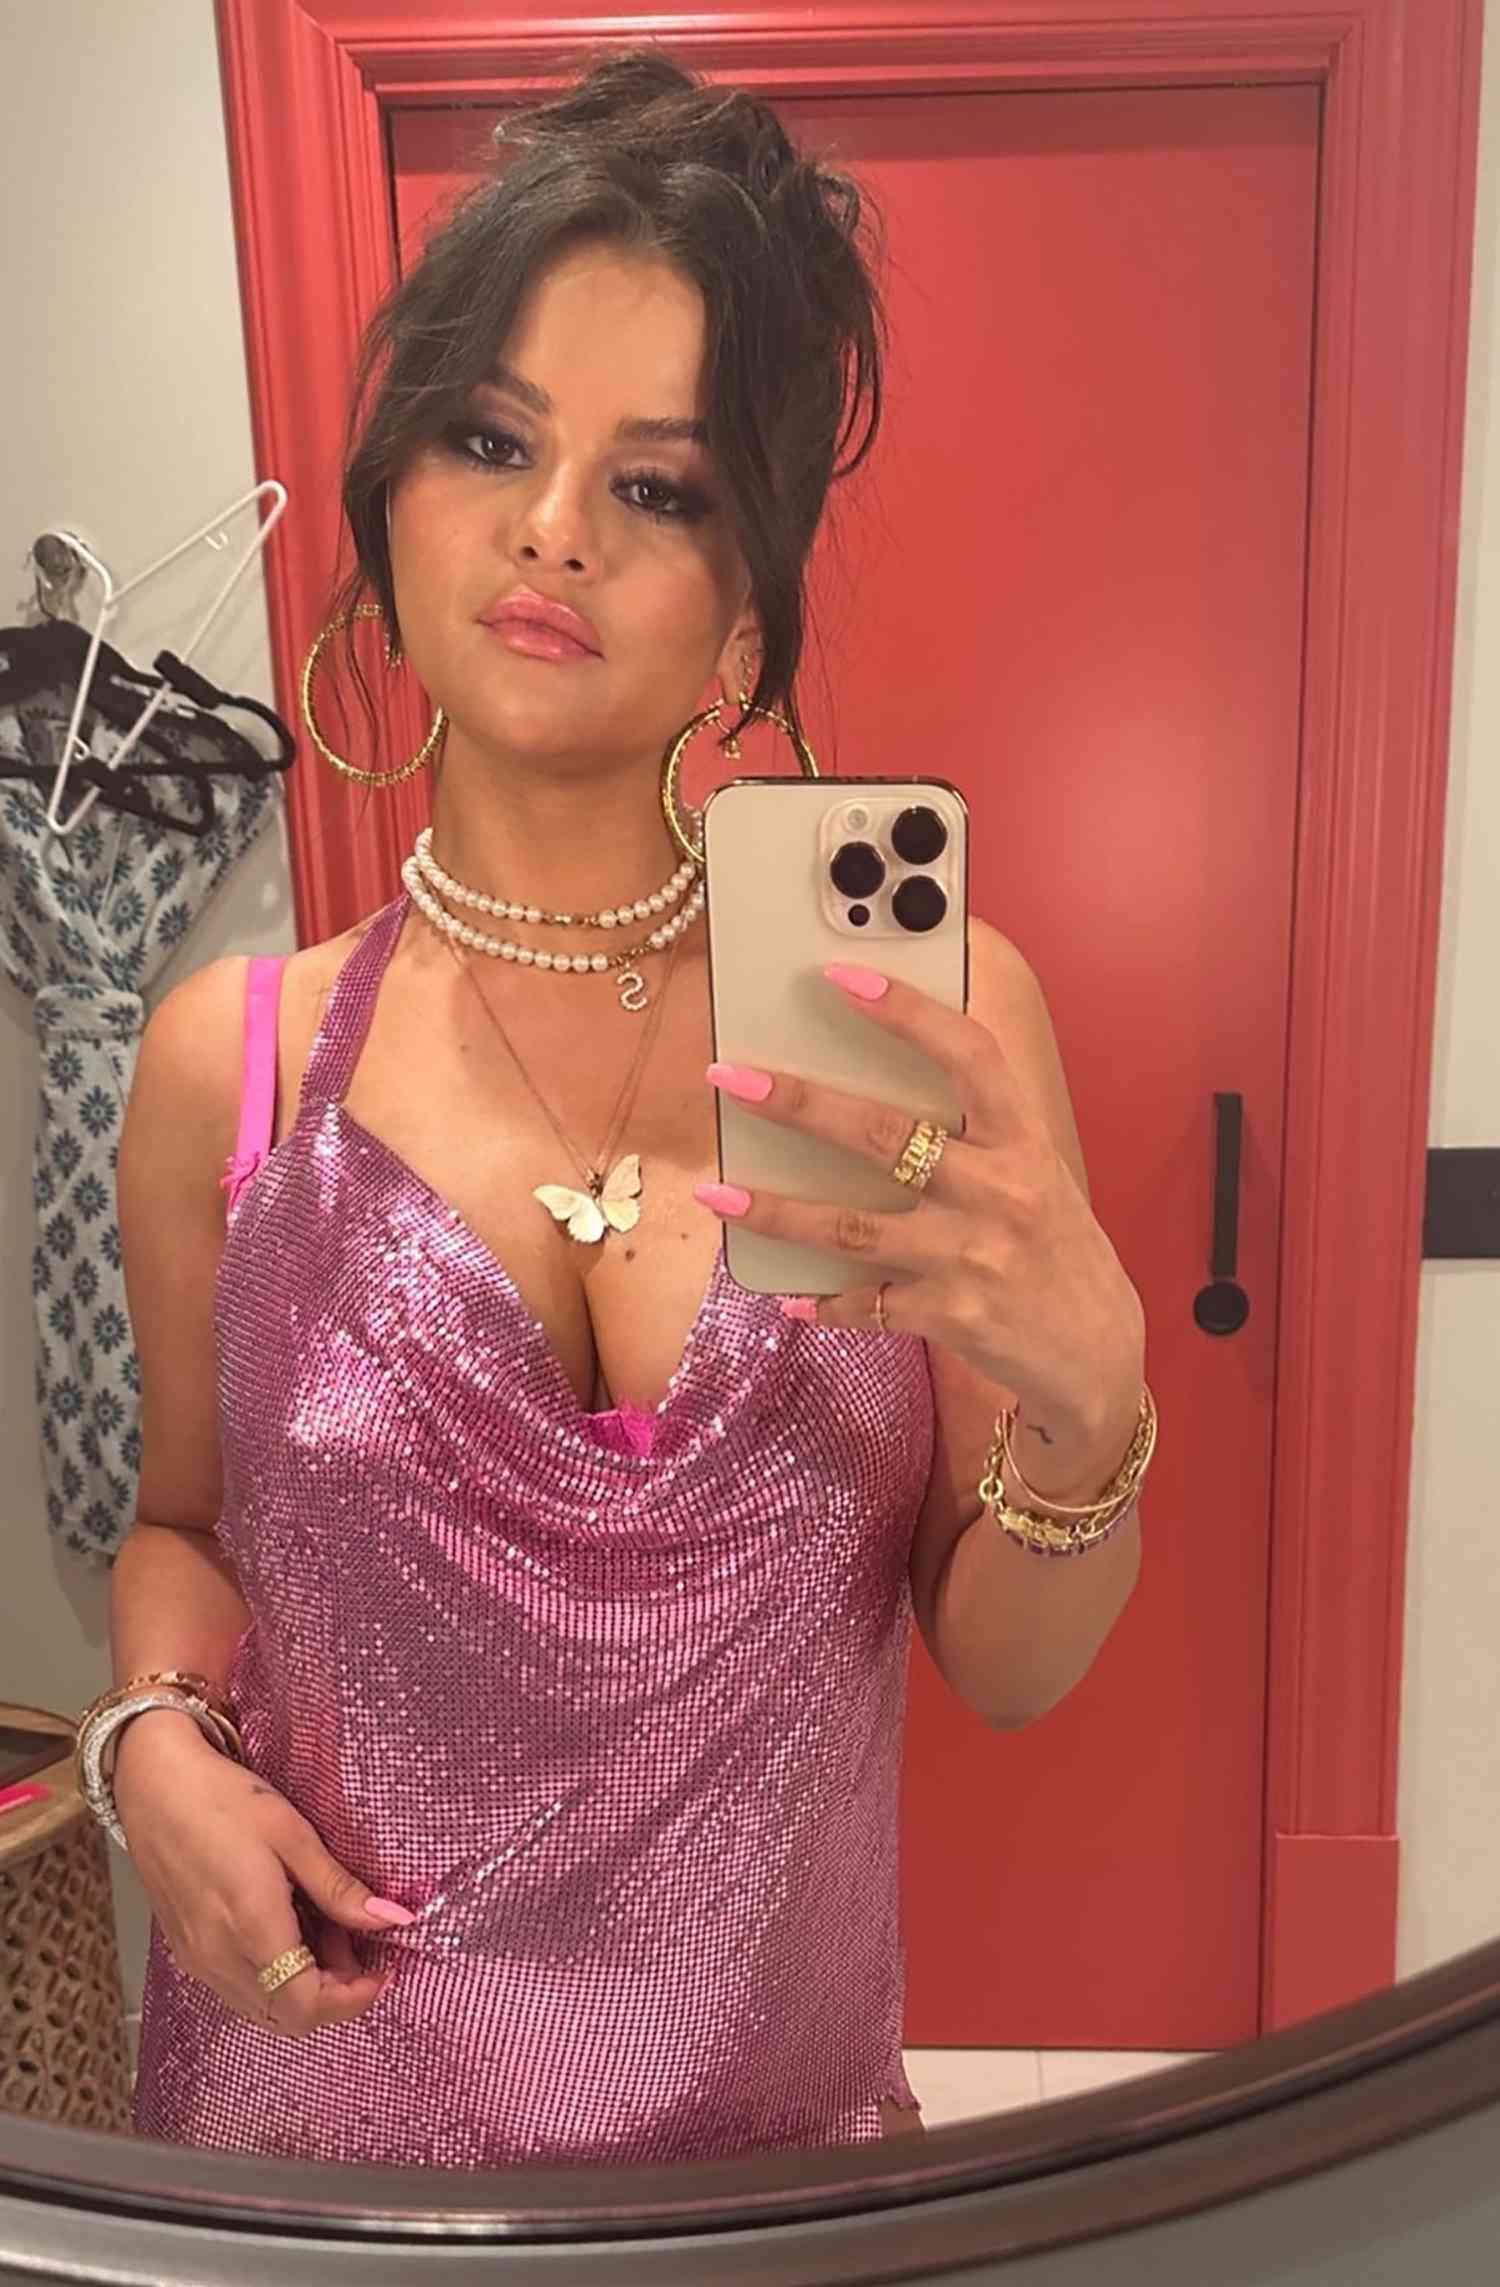 dodong santiago recommends selena gomez showing boobs pic